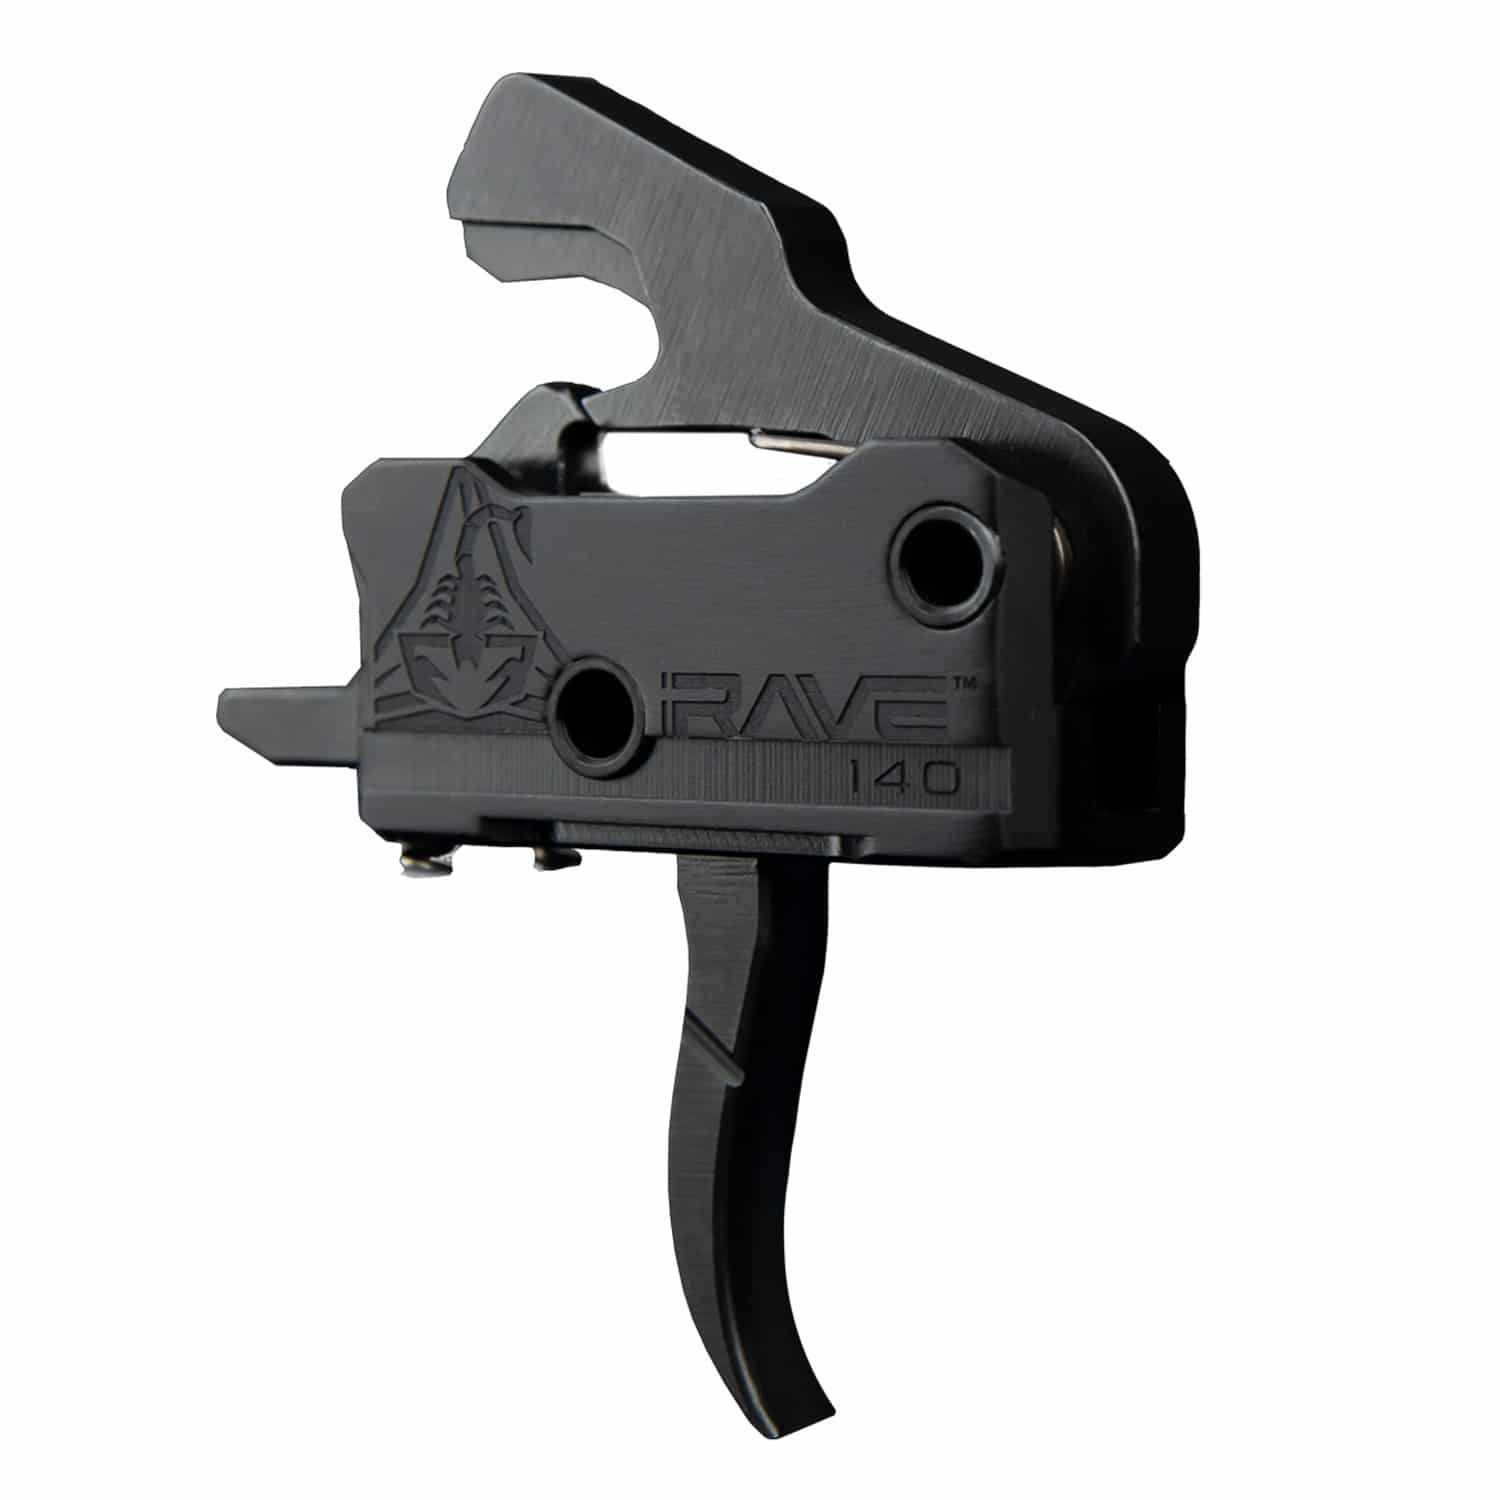 Rise Armament Rave 140 Super Sporting AR 15 Trigger with Anti-Walk Pins - Gen 2